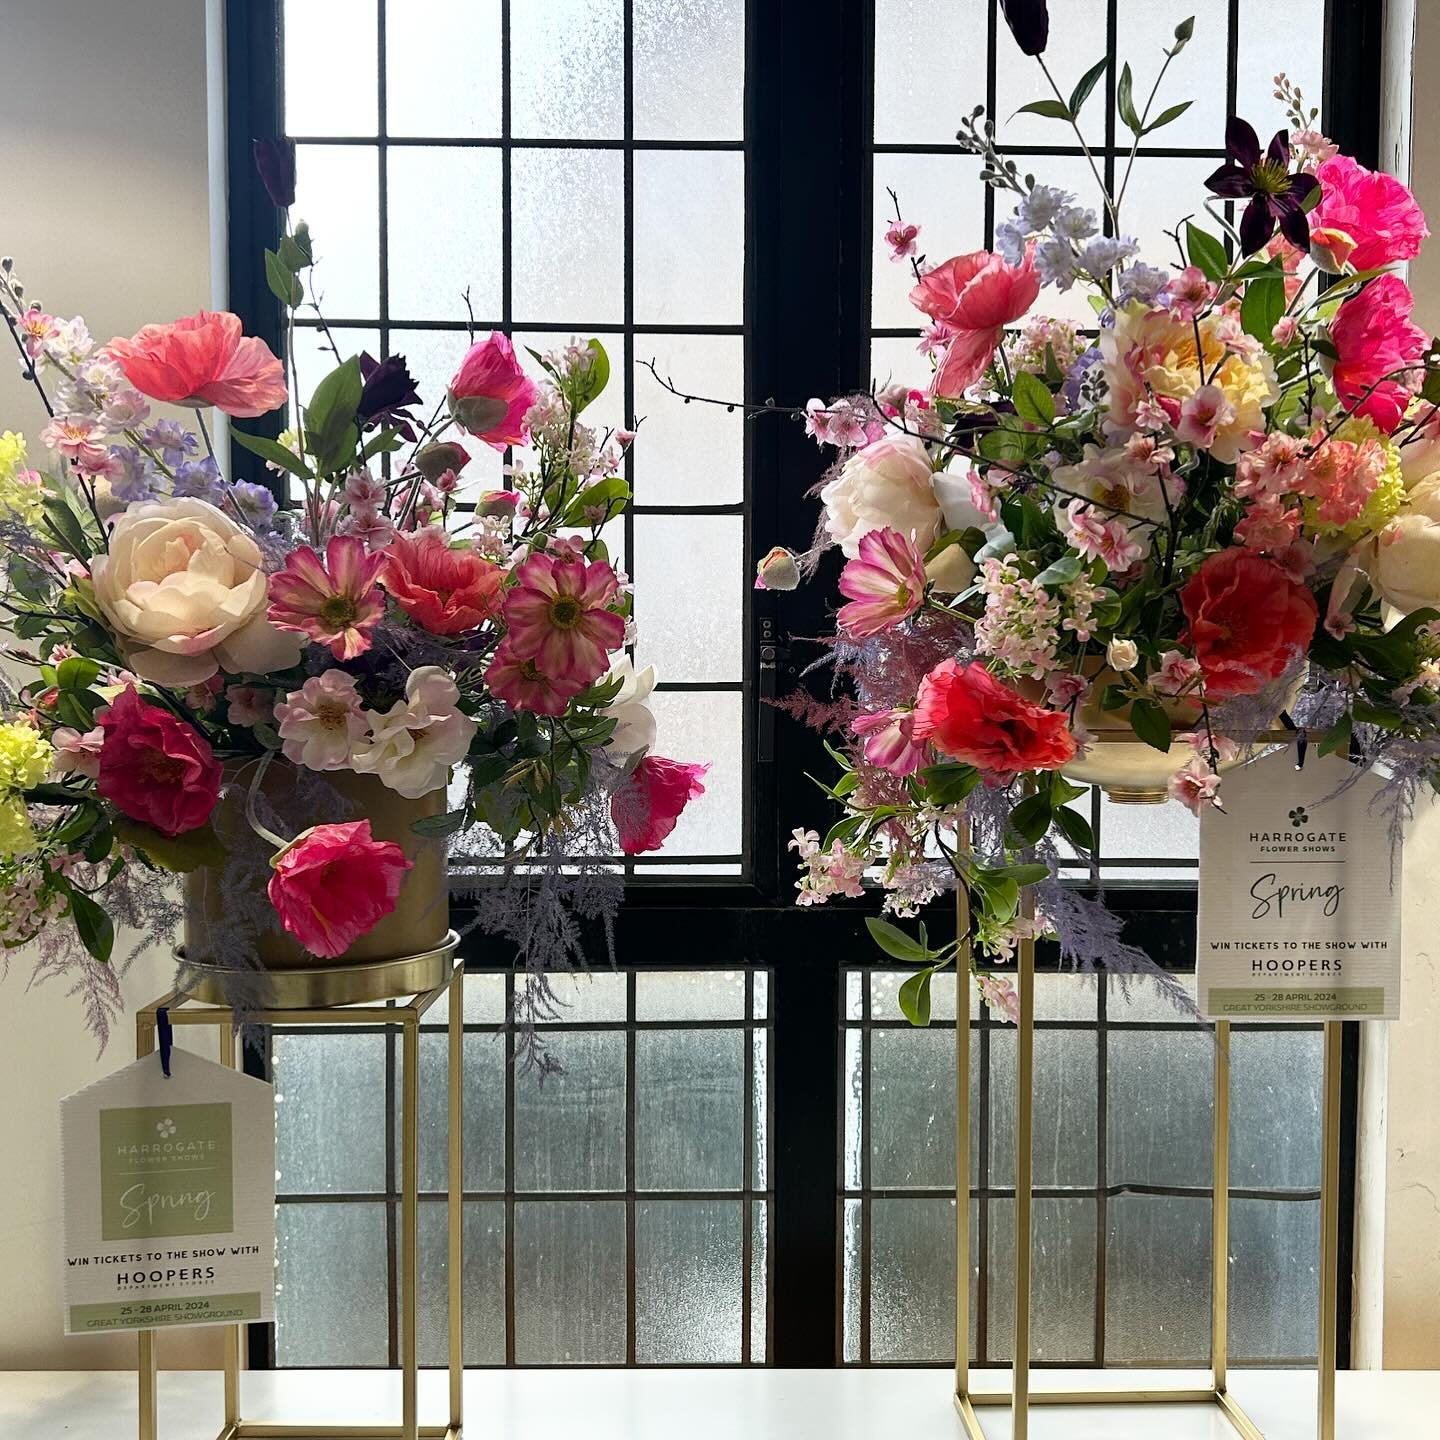 We have filled @hoopersedit in Harrogate with a pop of spring brights to celebrate @harrogateflowershow that is taking place this week! You can win two tickets in store. We are super busy prepping behind the scenes for our upcoming installation that 